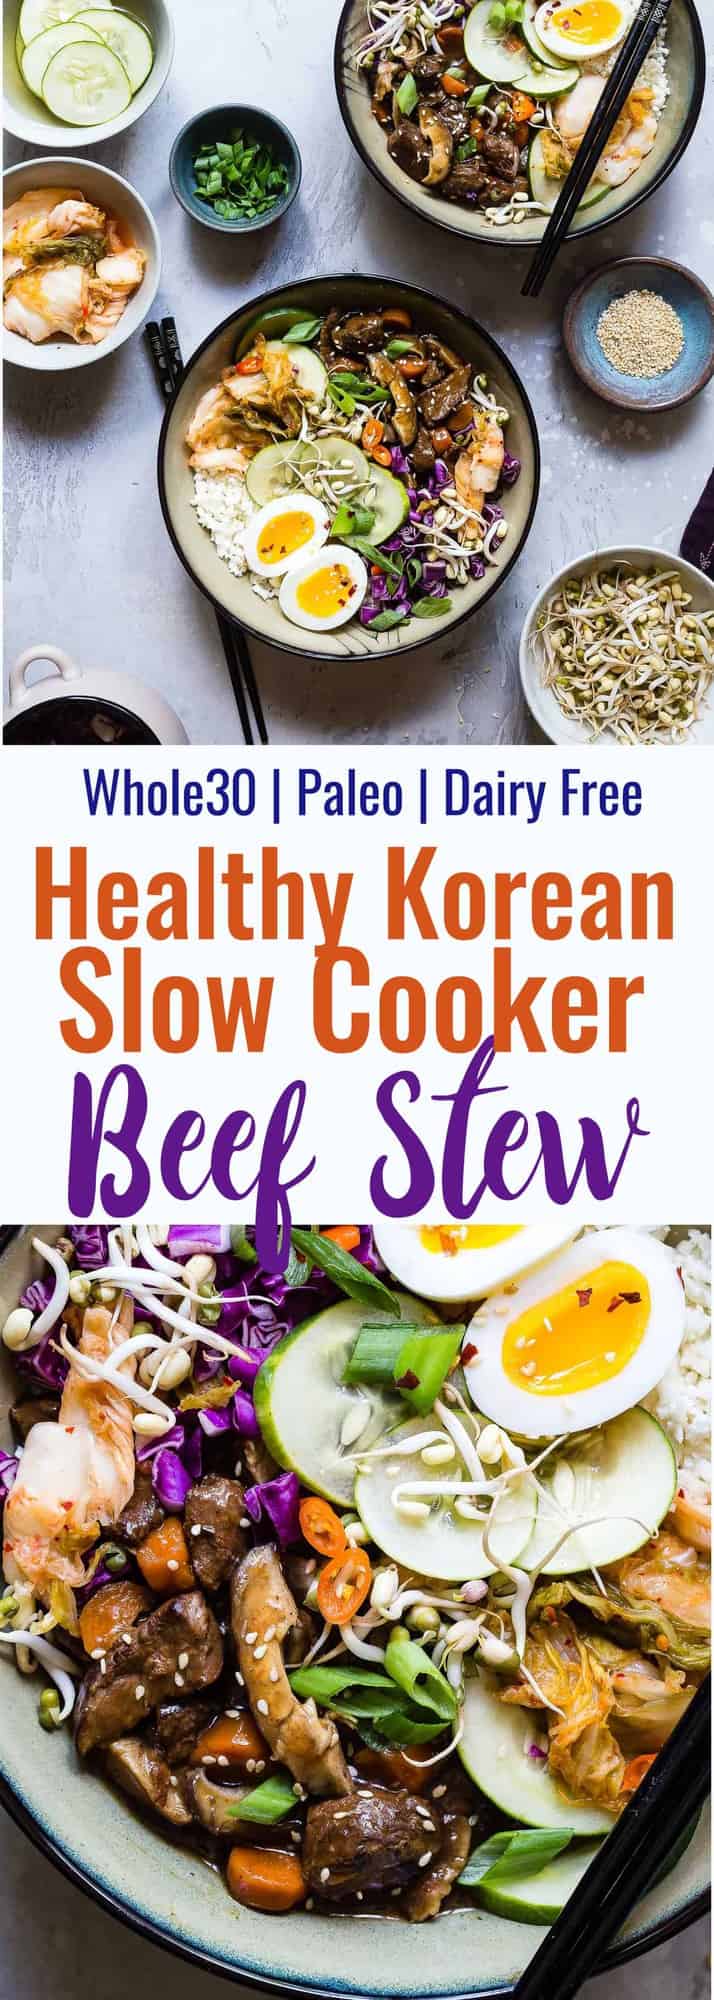 Slow Cooker Whole30 Korean Beef Stew - This Paleo Korean Beef Stew is made in the crock pot for an easy gluten/grain/dairy/sugar free weeknight dinner with addicting spicy-sweet flavor! It's healthy comfort food at it's best!  | #Foodfaithfitness | #Glutenfree #Paleo #Whole30 #Slowcooker #Healthy